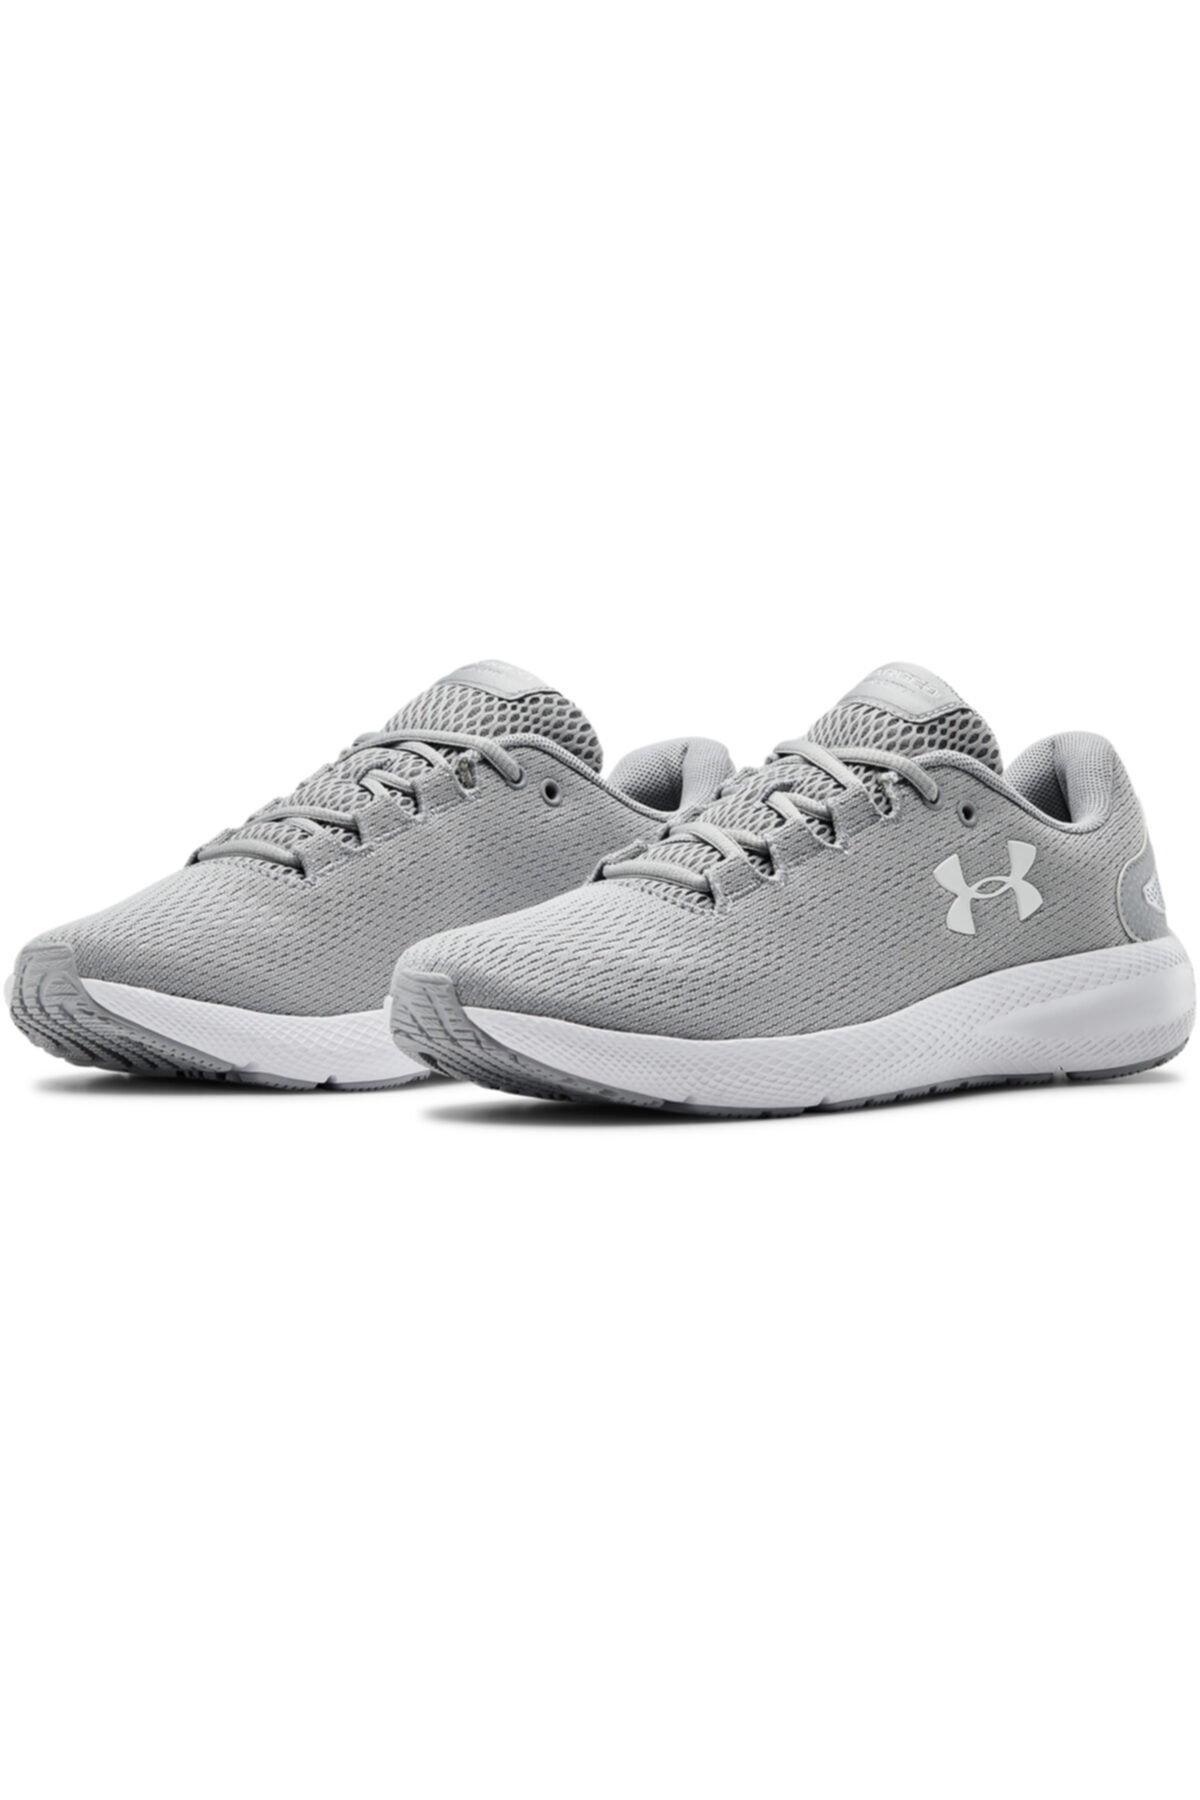 under armour training shoes women's